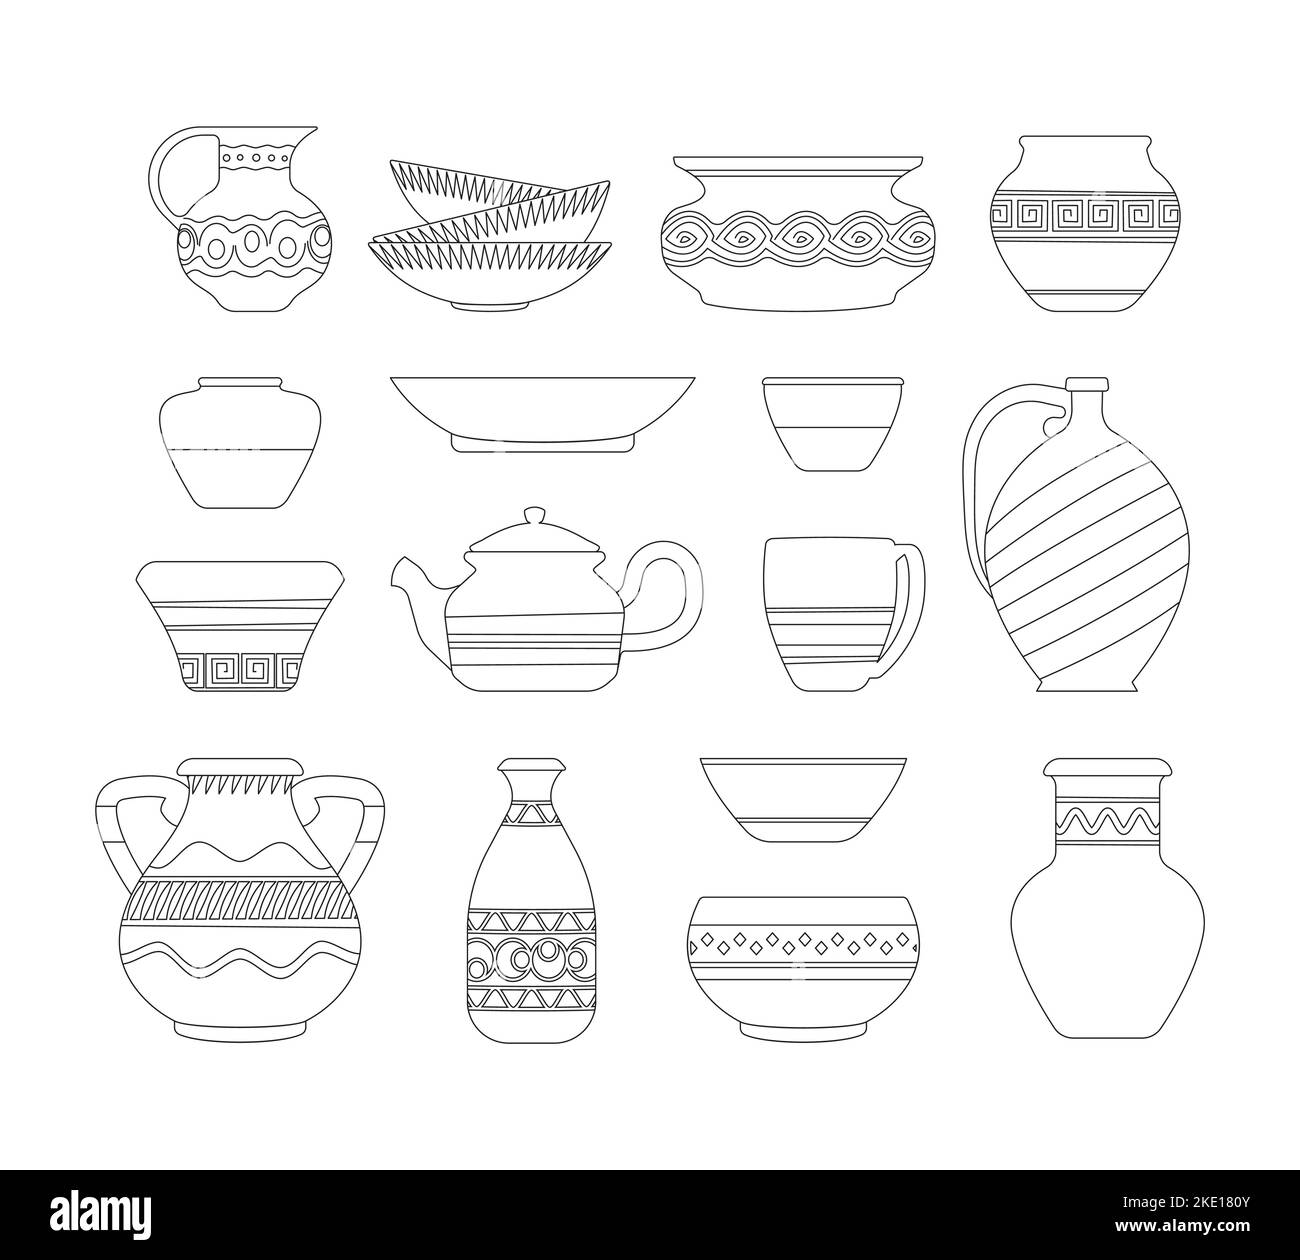 Outline vases. Abstract vintage linear pottery icons, minimal ancient decorative ceramic utensil pot jug vessel urn, simple clay craft objects. Vector set of pottery vase antique illustration Stock Vector